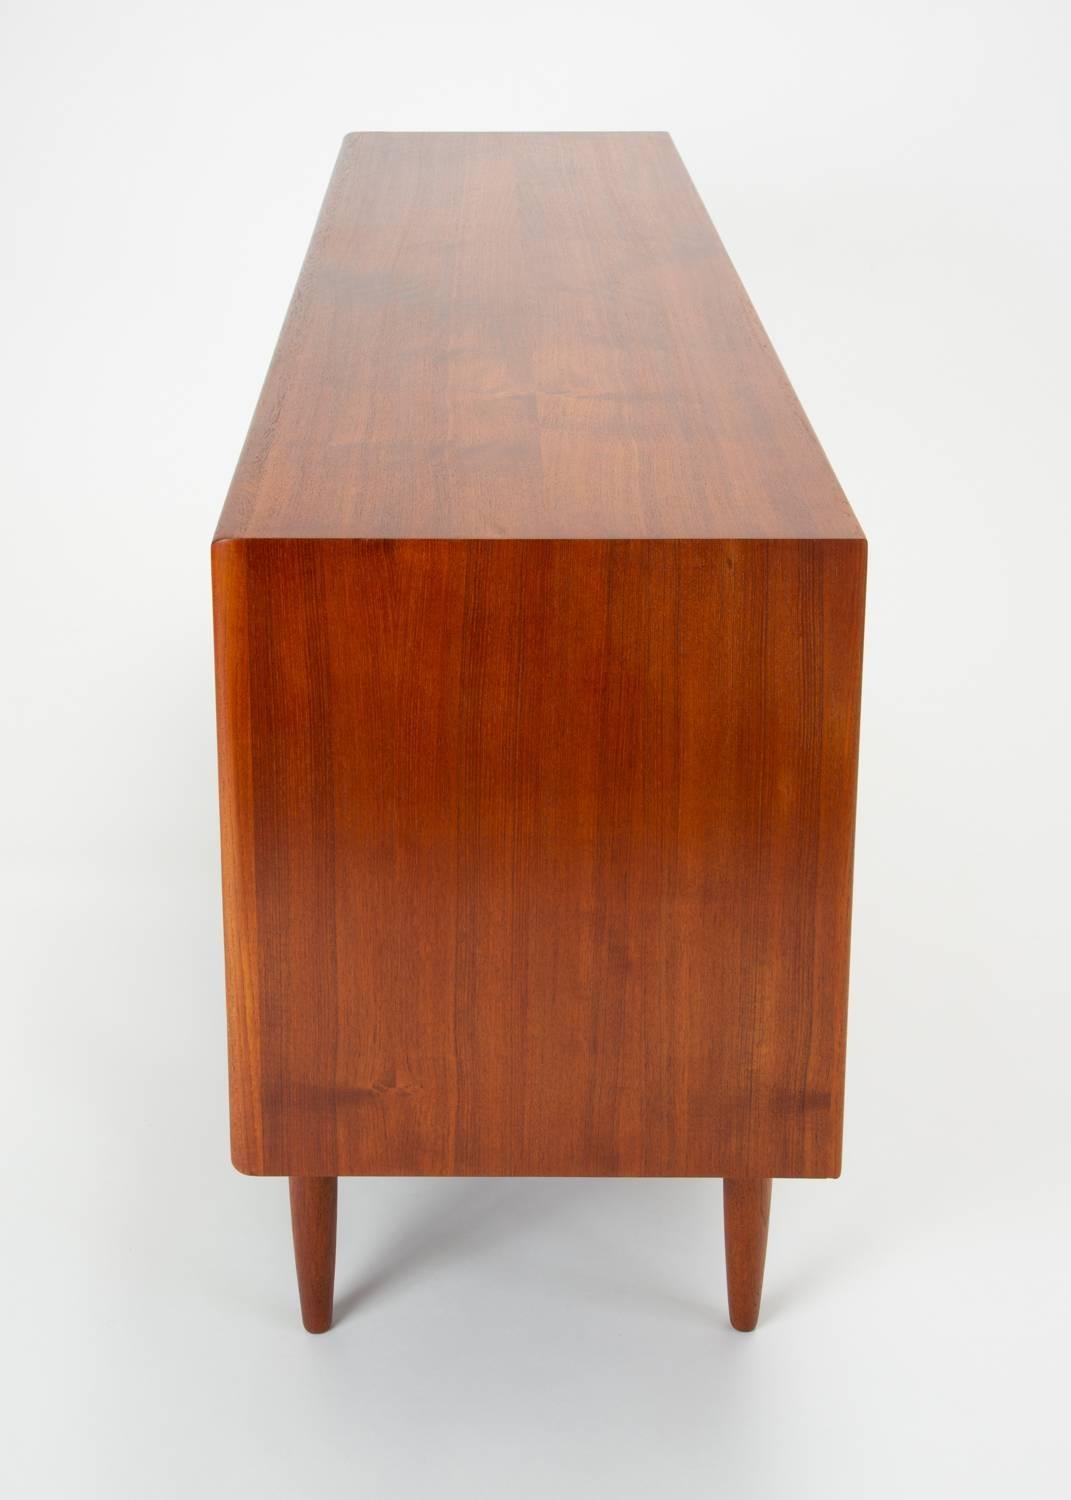 Danish Modern Teak Credenza with Bowtie Drawers by Johannes Aasbjerg 8